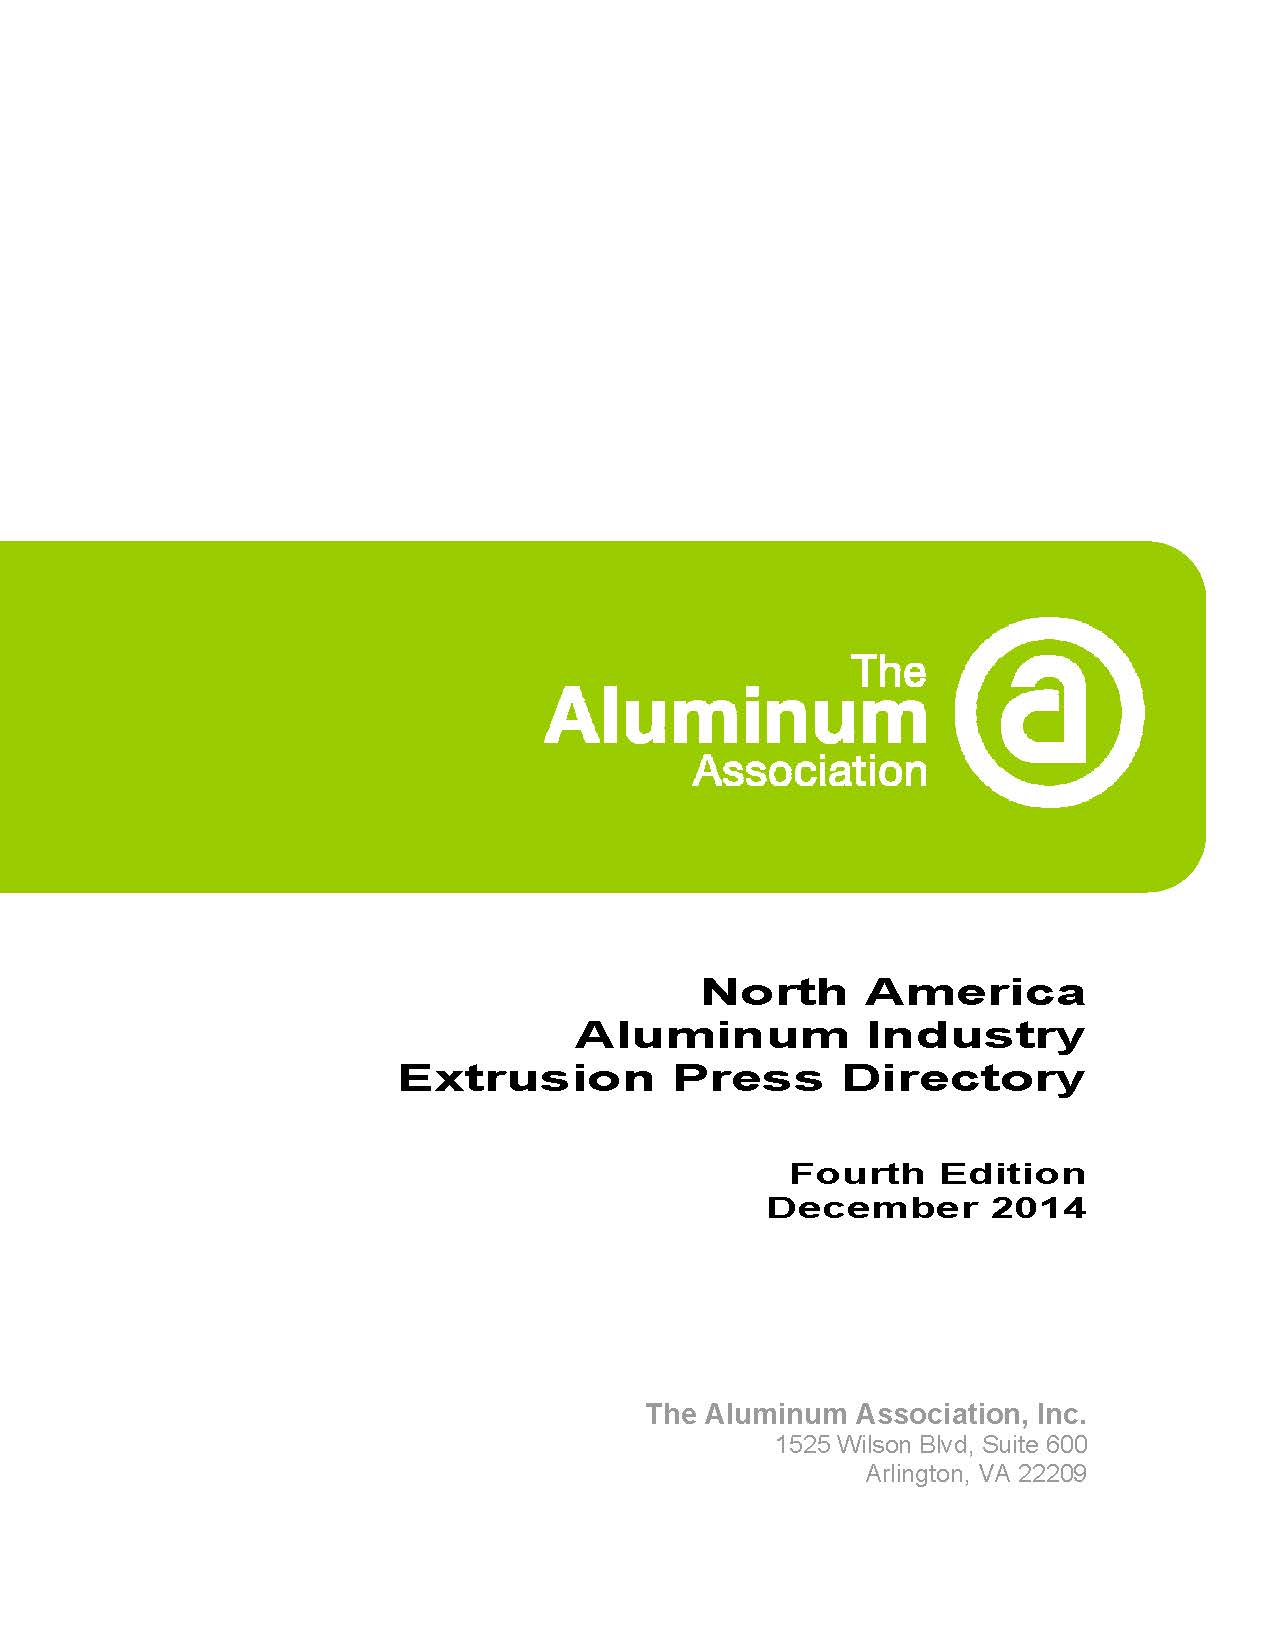 North America Aluminum Industry Extrusion Press Directory